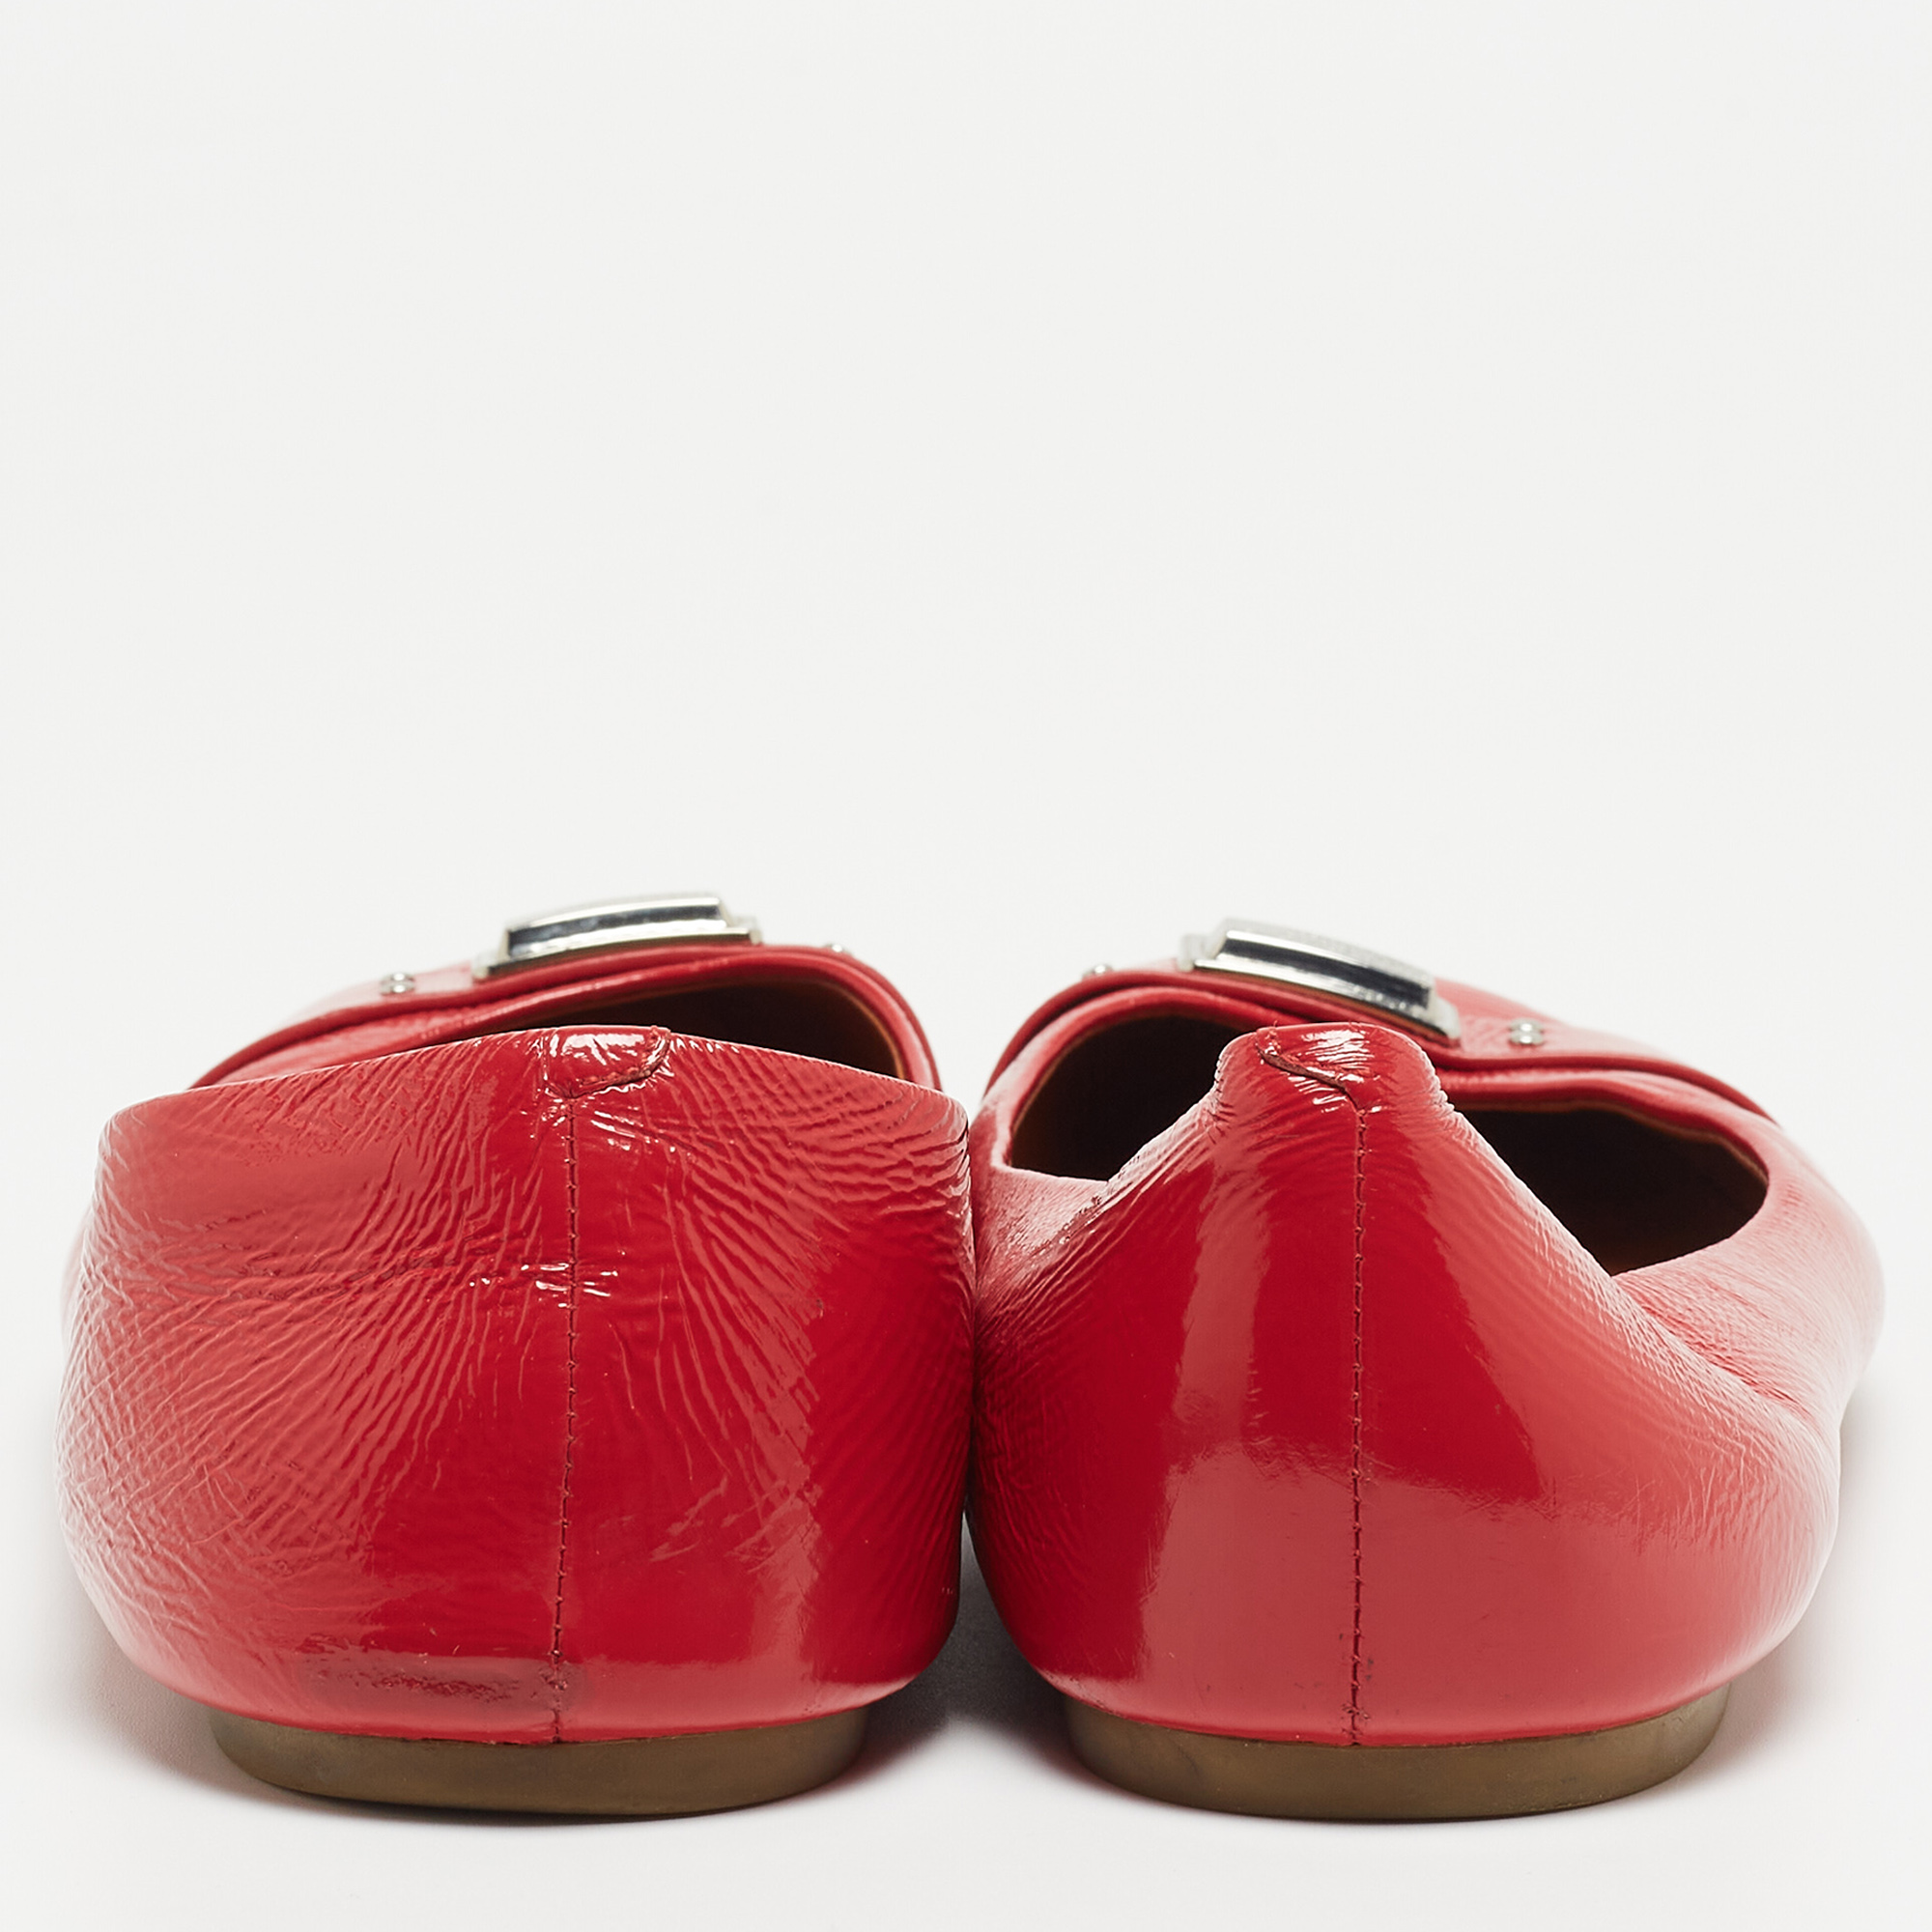 Marc By Marc Jacobs Red Patent Leather Ballet Flats Size 41